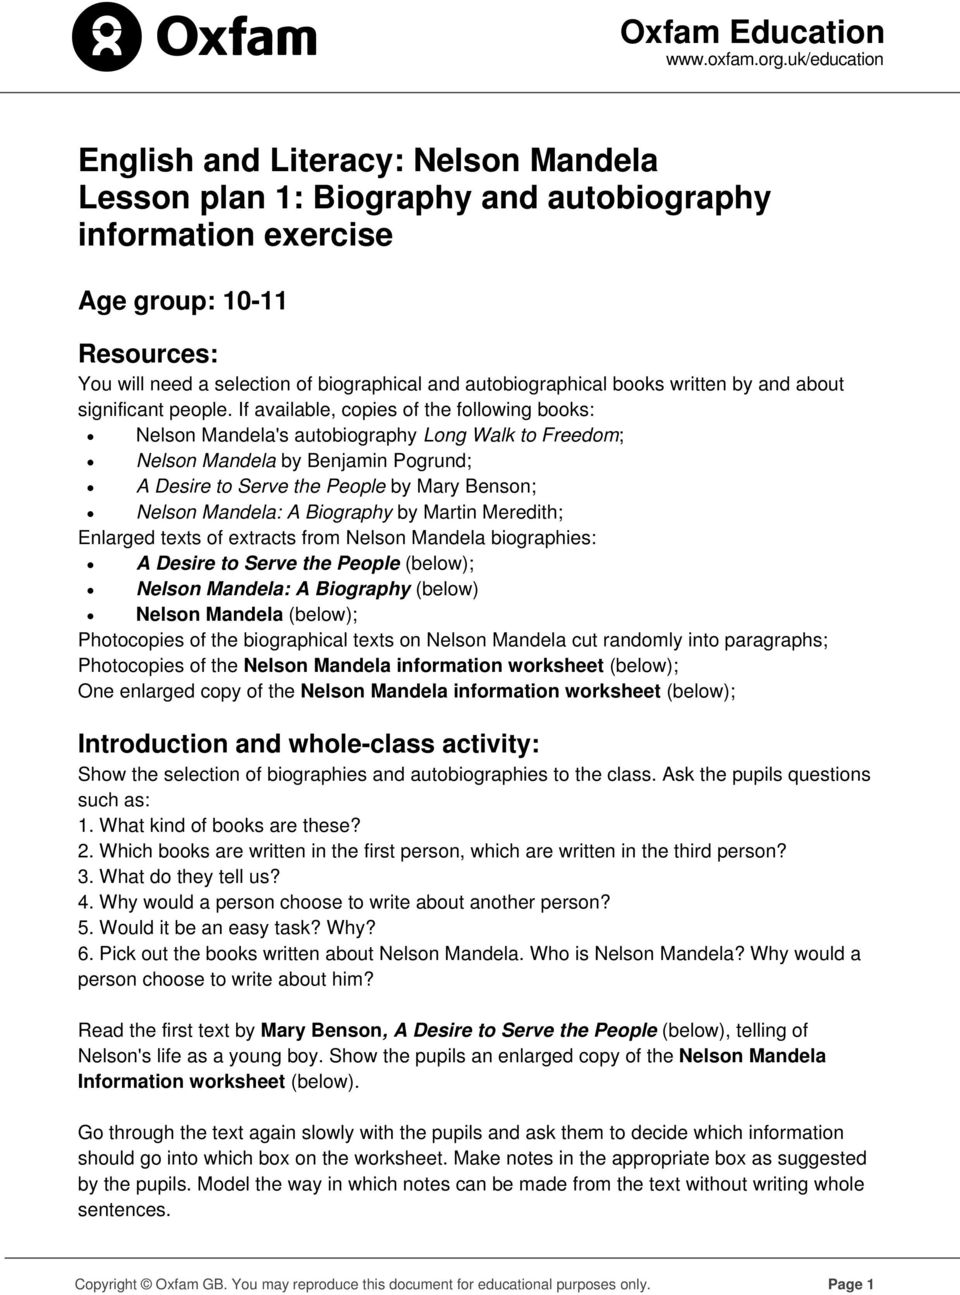 English And Literacy Nelson Mandela Lesson Plan 1 Biography And Autobiography Information Exercise Pdf Free Download